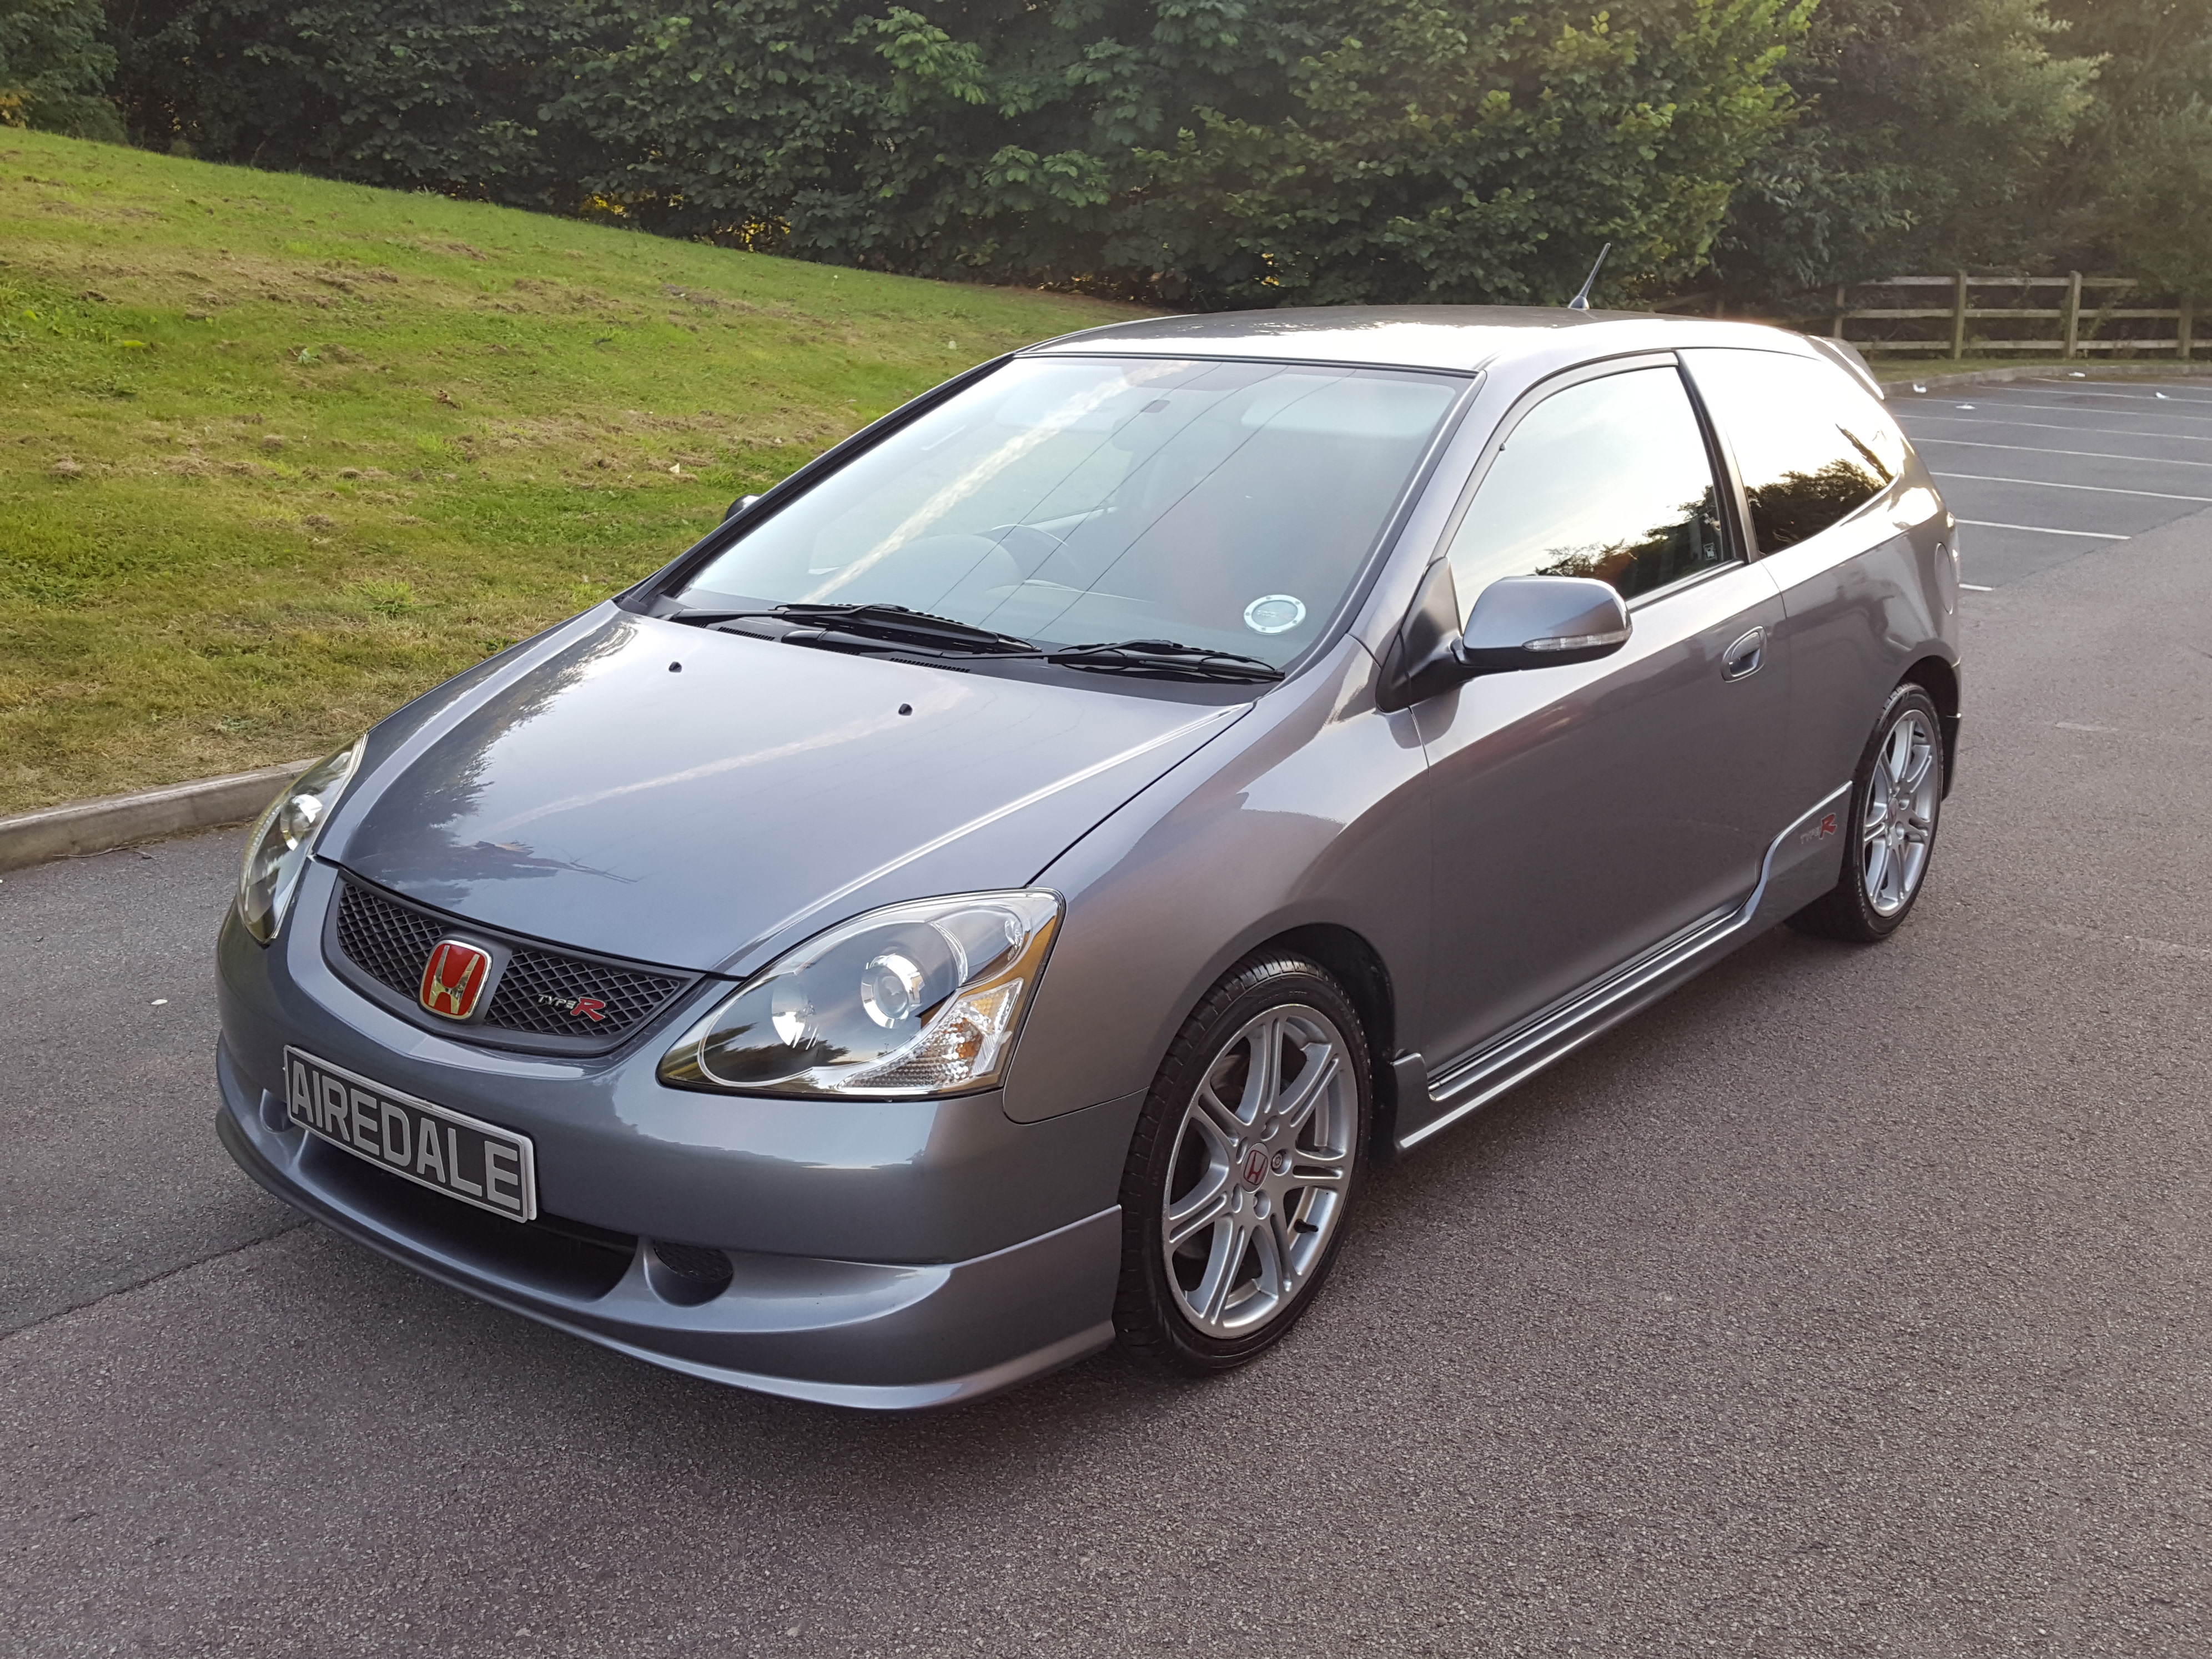 2006 HONDA CIVIC 2.0 TYPE-R 3DR HATCHBACK - Airedale Cars